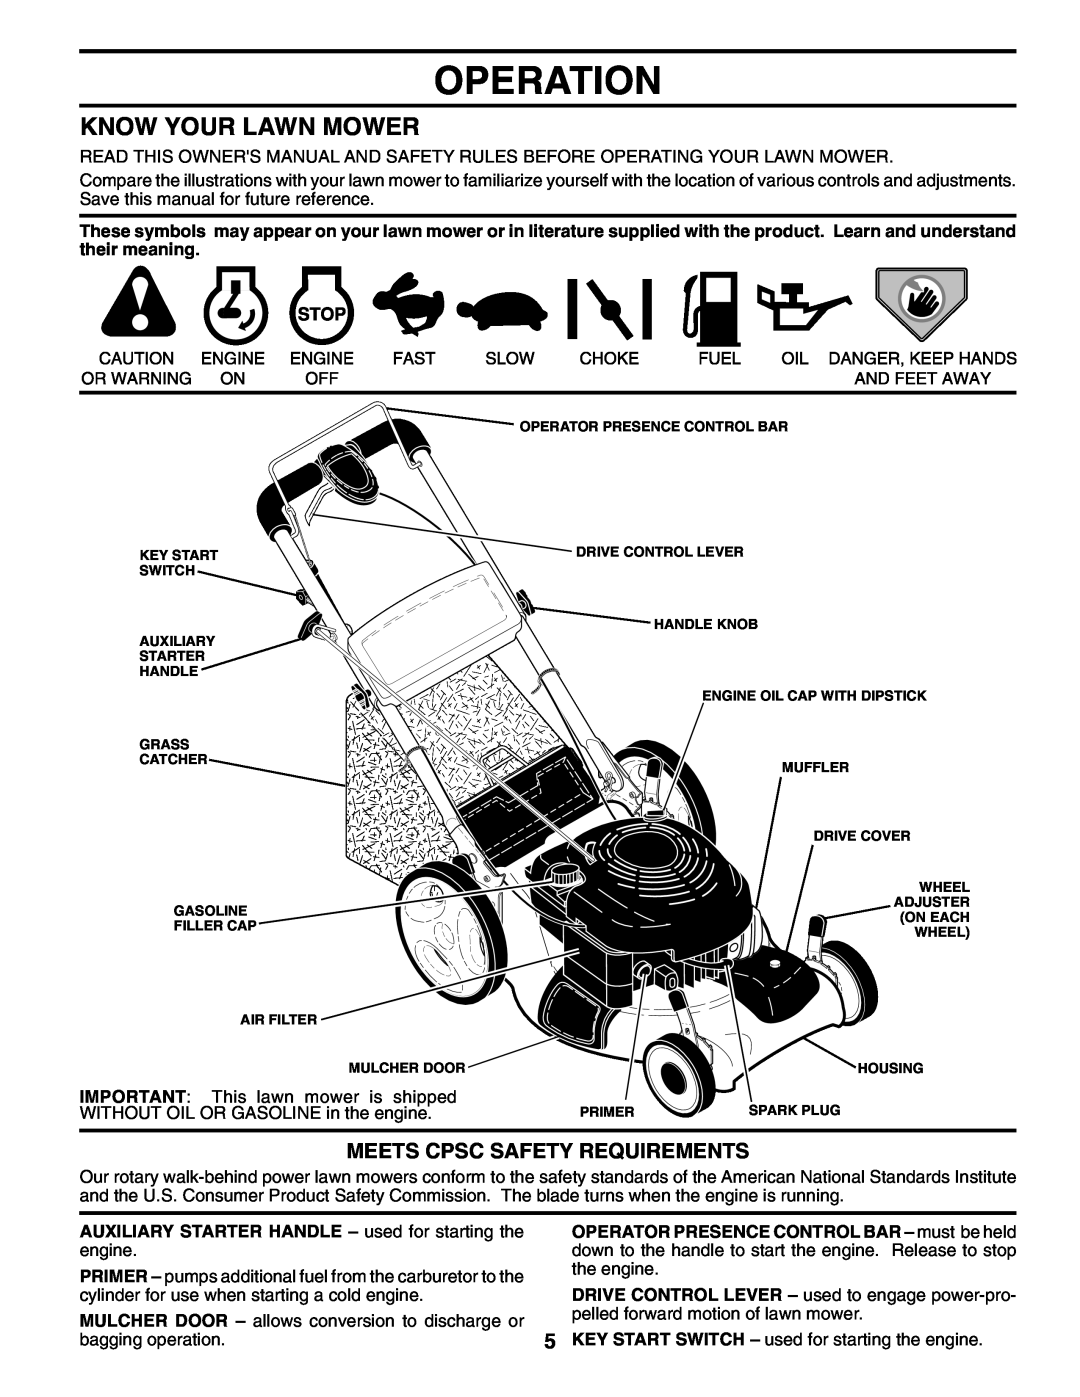 Husqvarna 65021ES owner manual Operation, Know Your Lawn Mower, Meets Cpsc Safety Requirements 